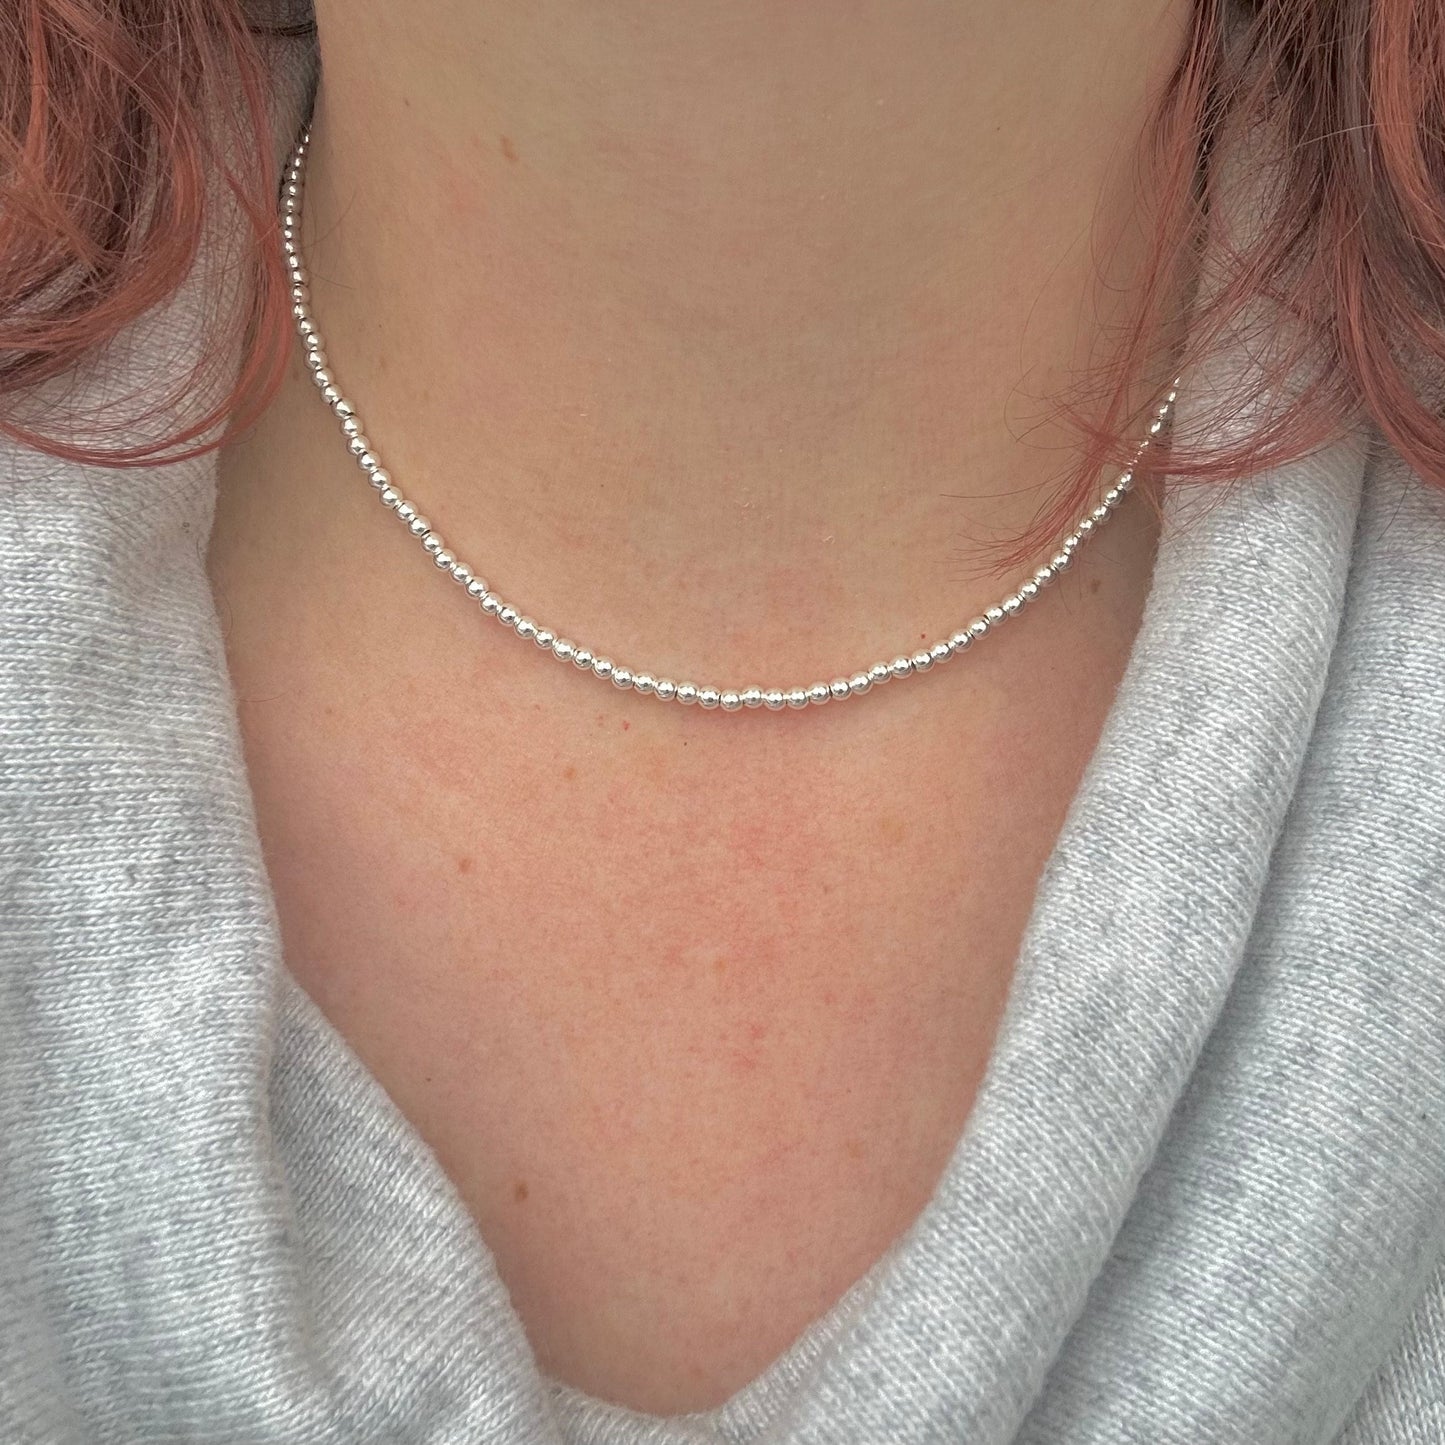 Thin Sterling Silver 3mm Bead Necklace, dainty necklace